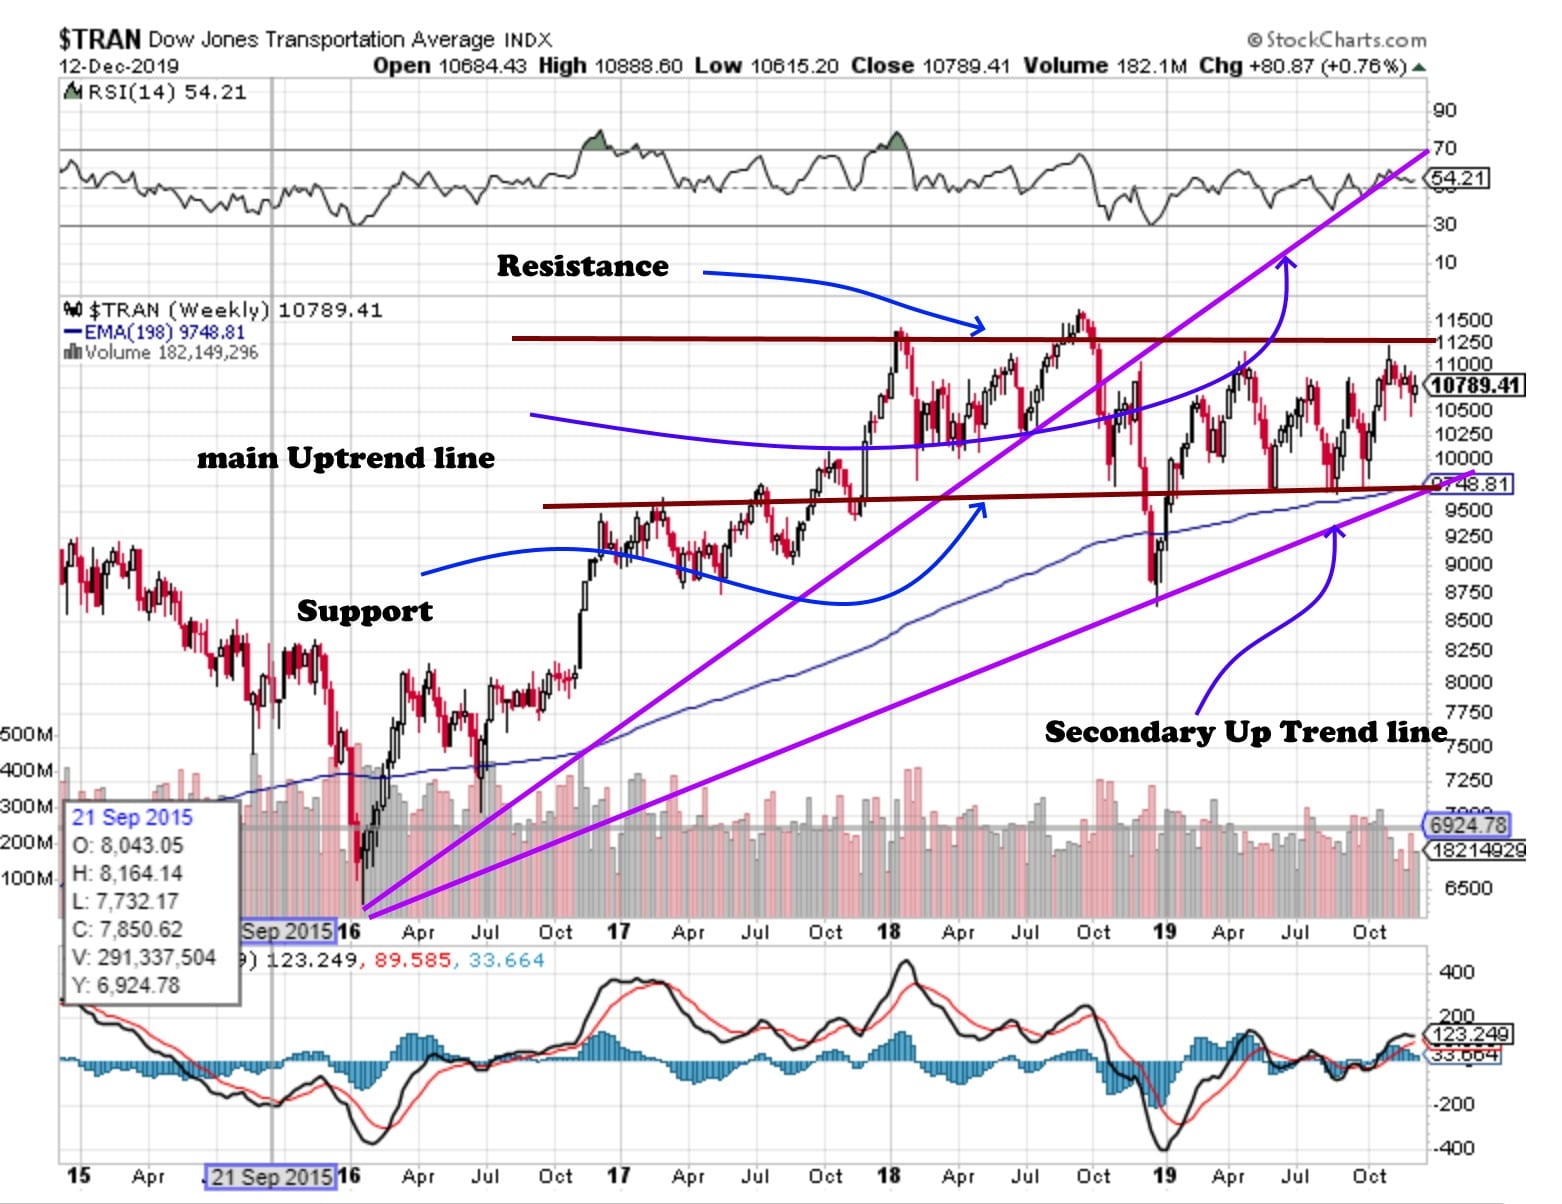 Dow transports support higher prices 